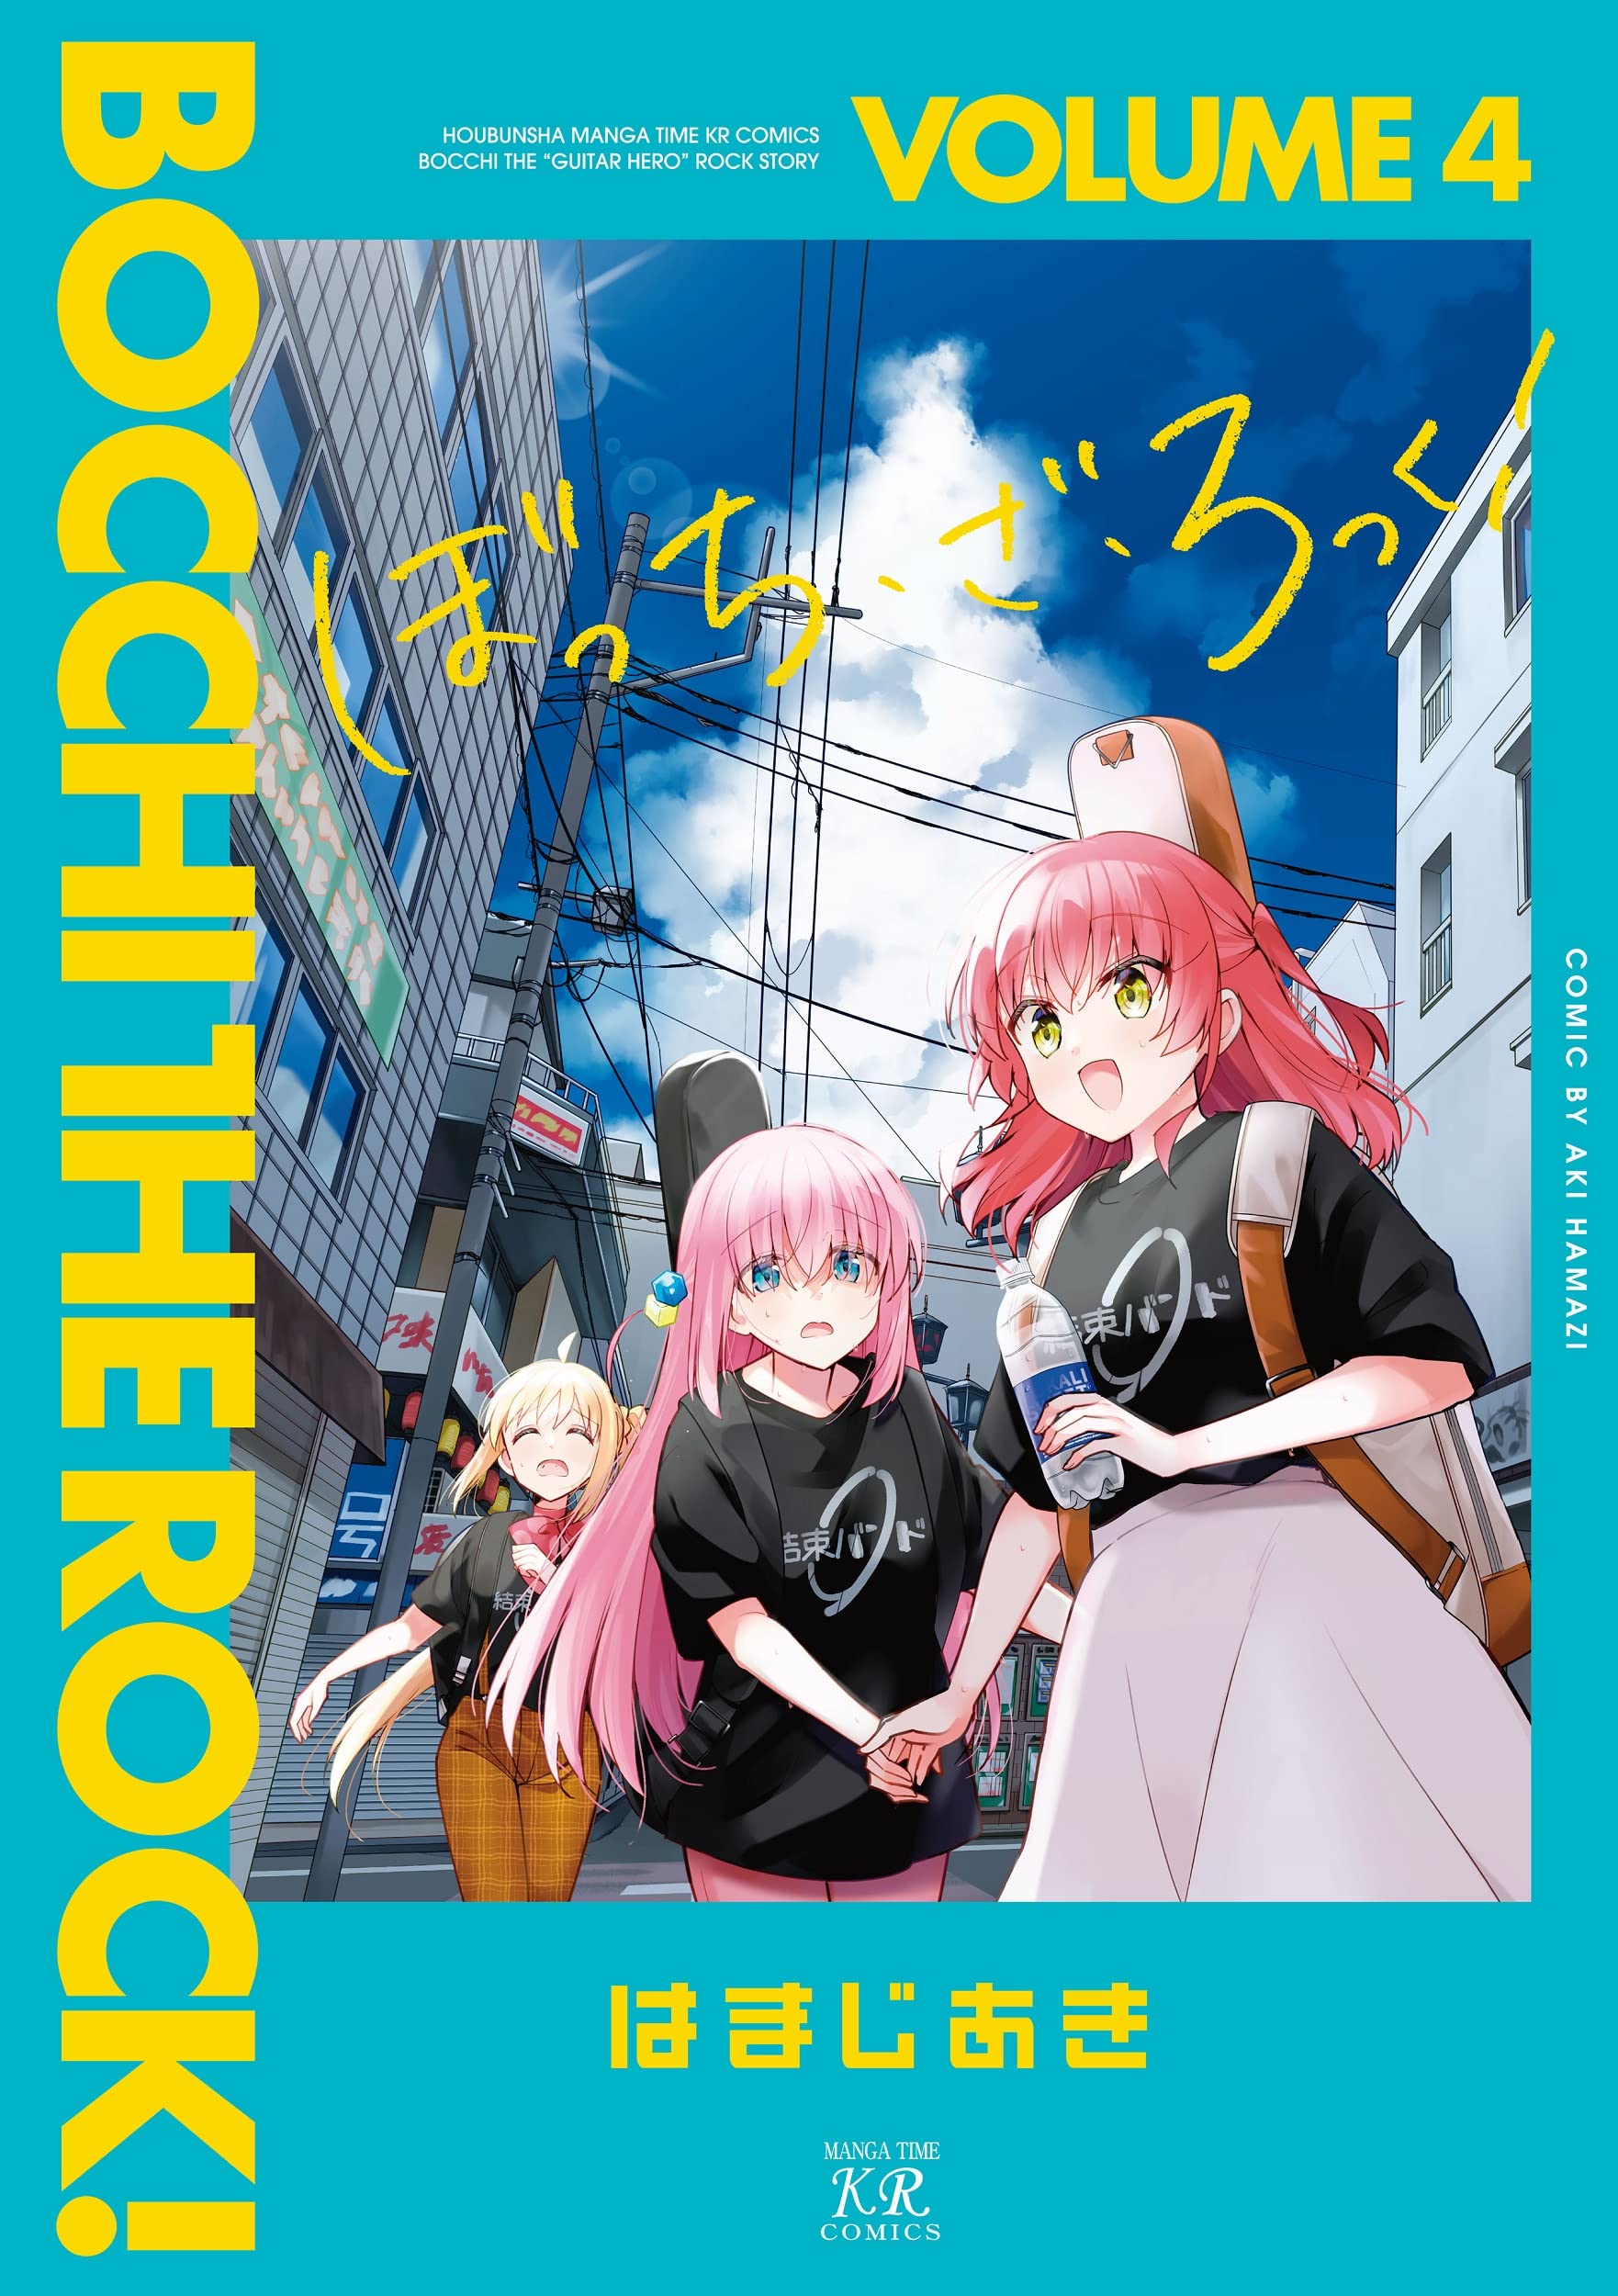 Bocchi the Rock!: A Heartwarming Journey of Friendship and Self-Discovery